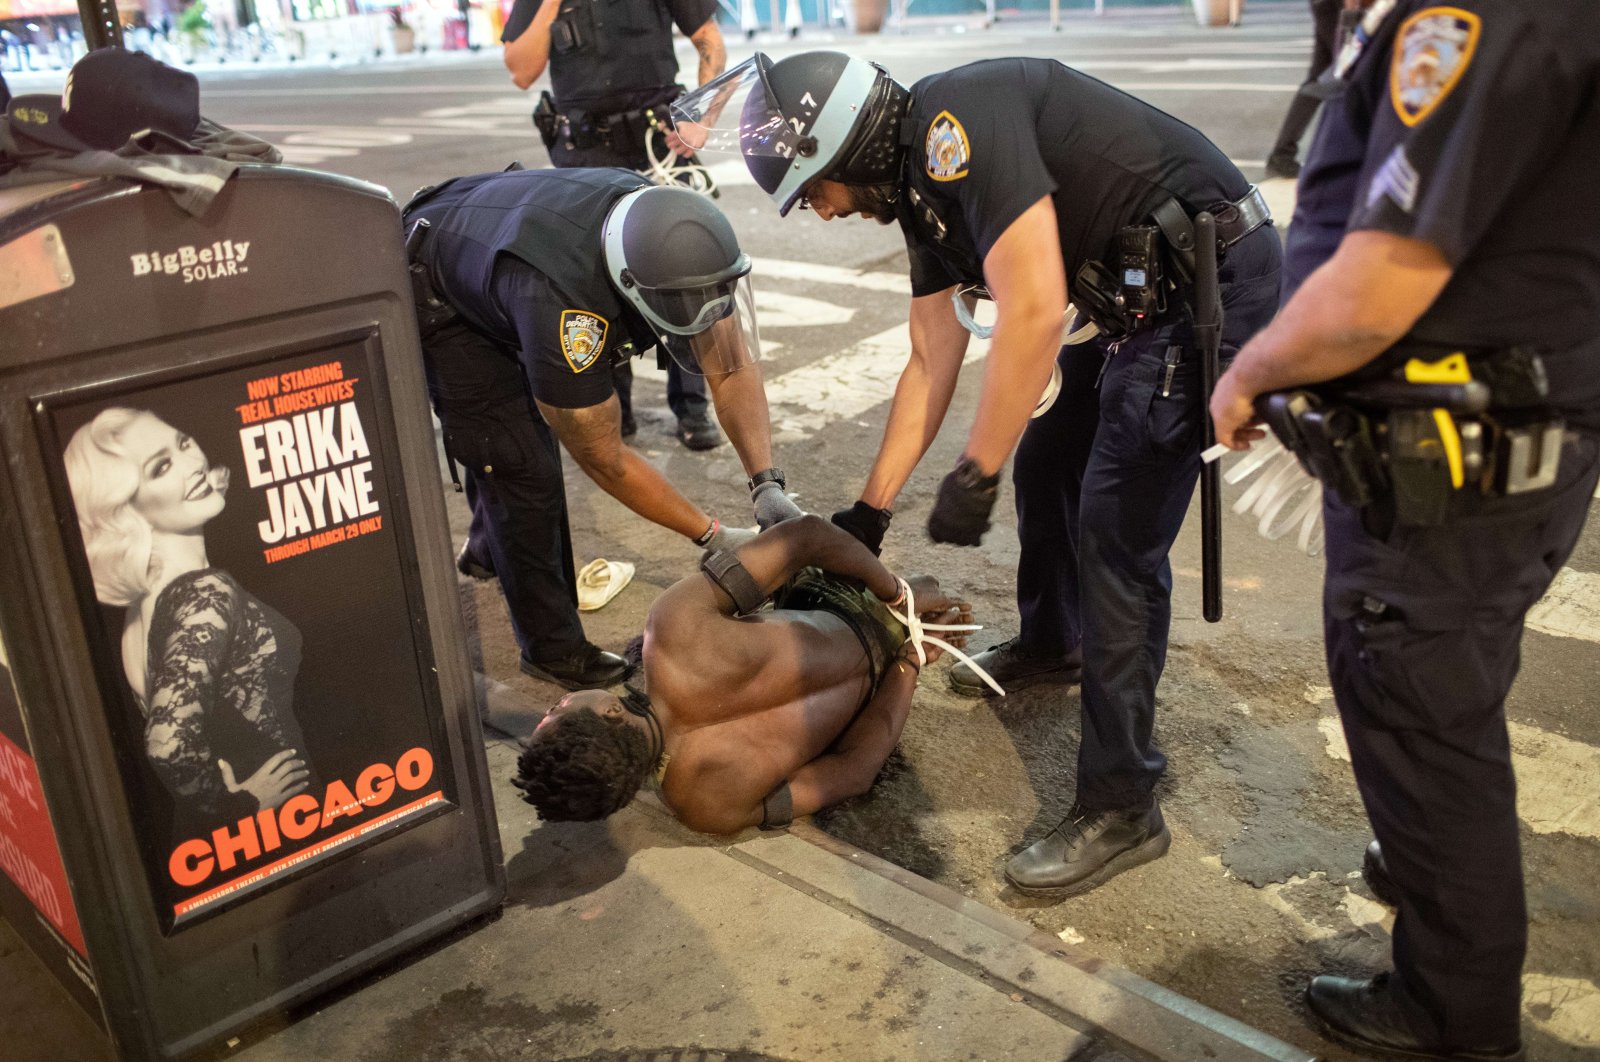 New York City police officers detain a man during a night of protests and vandalism over the death of George Floyd in New York City, U.S., on June 1, 2020. (AFP Photo)